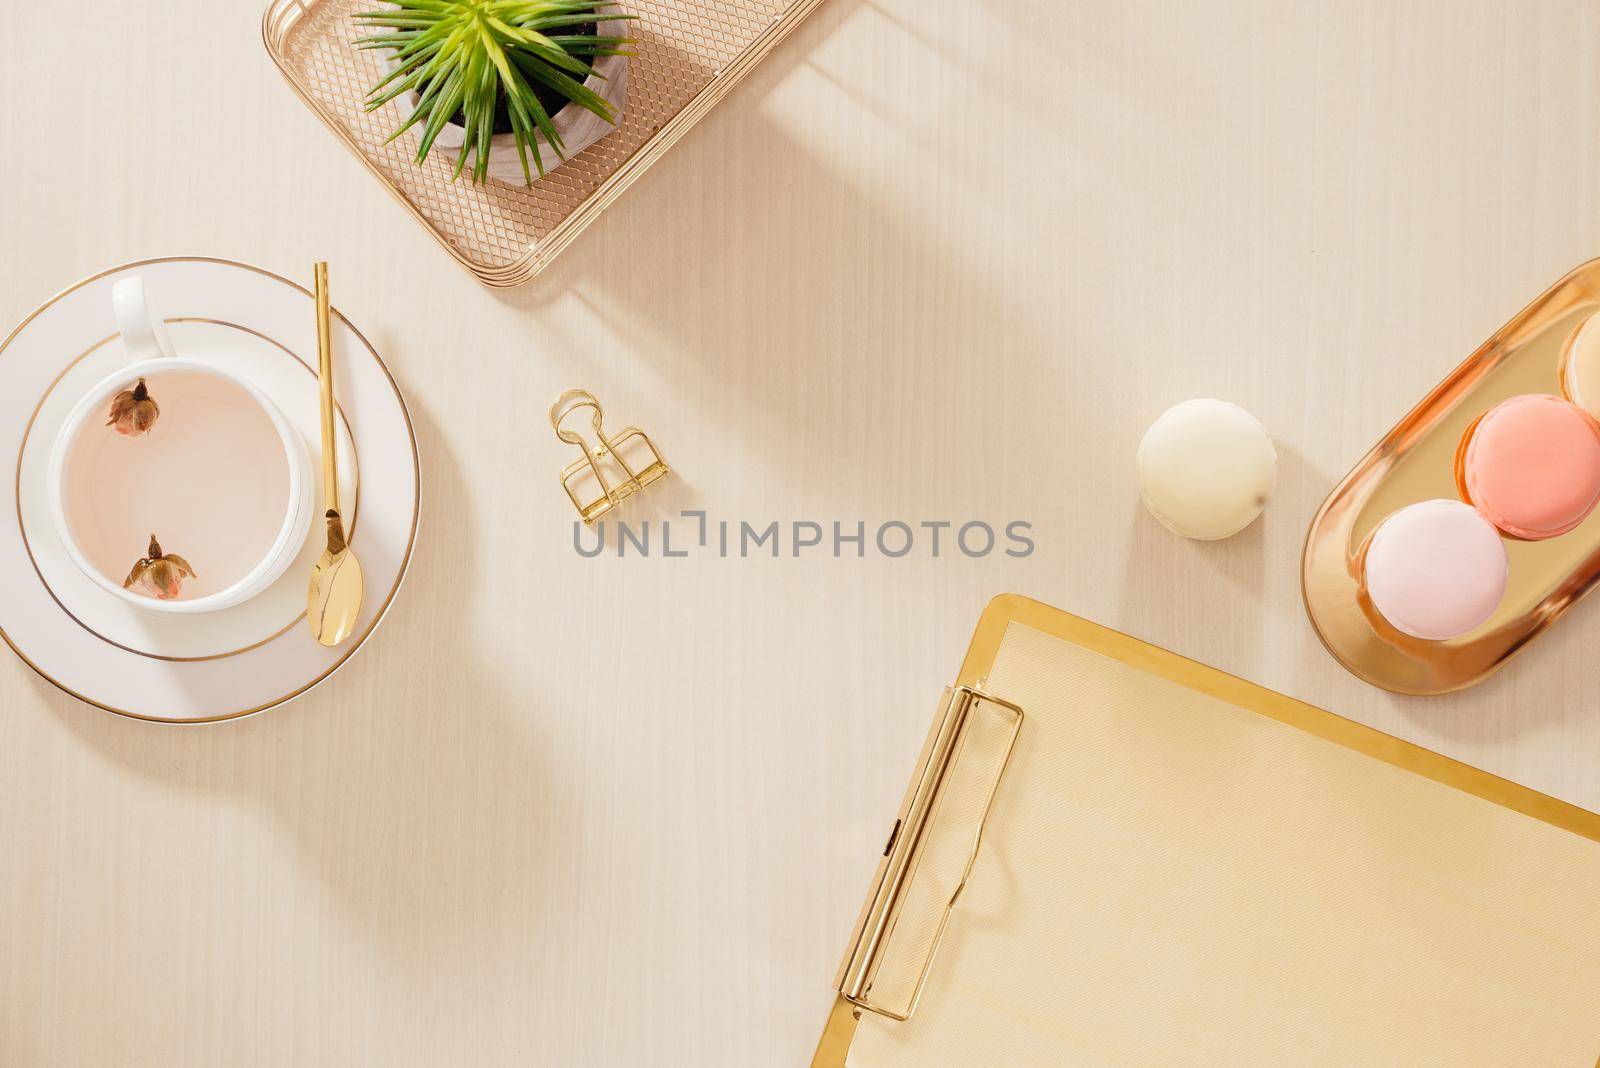 Modern gold stylized home office desk with folder, macaroons, coffee mug on beige background. Flat lay, top view lifestyle concept.`